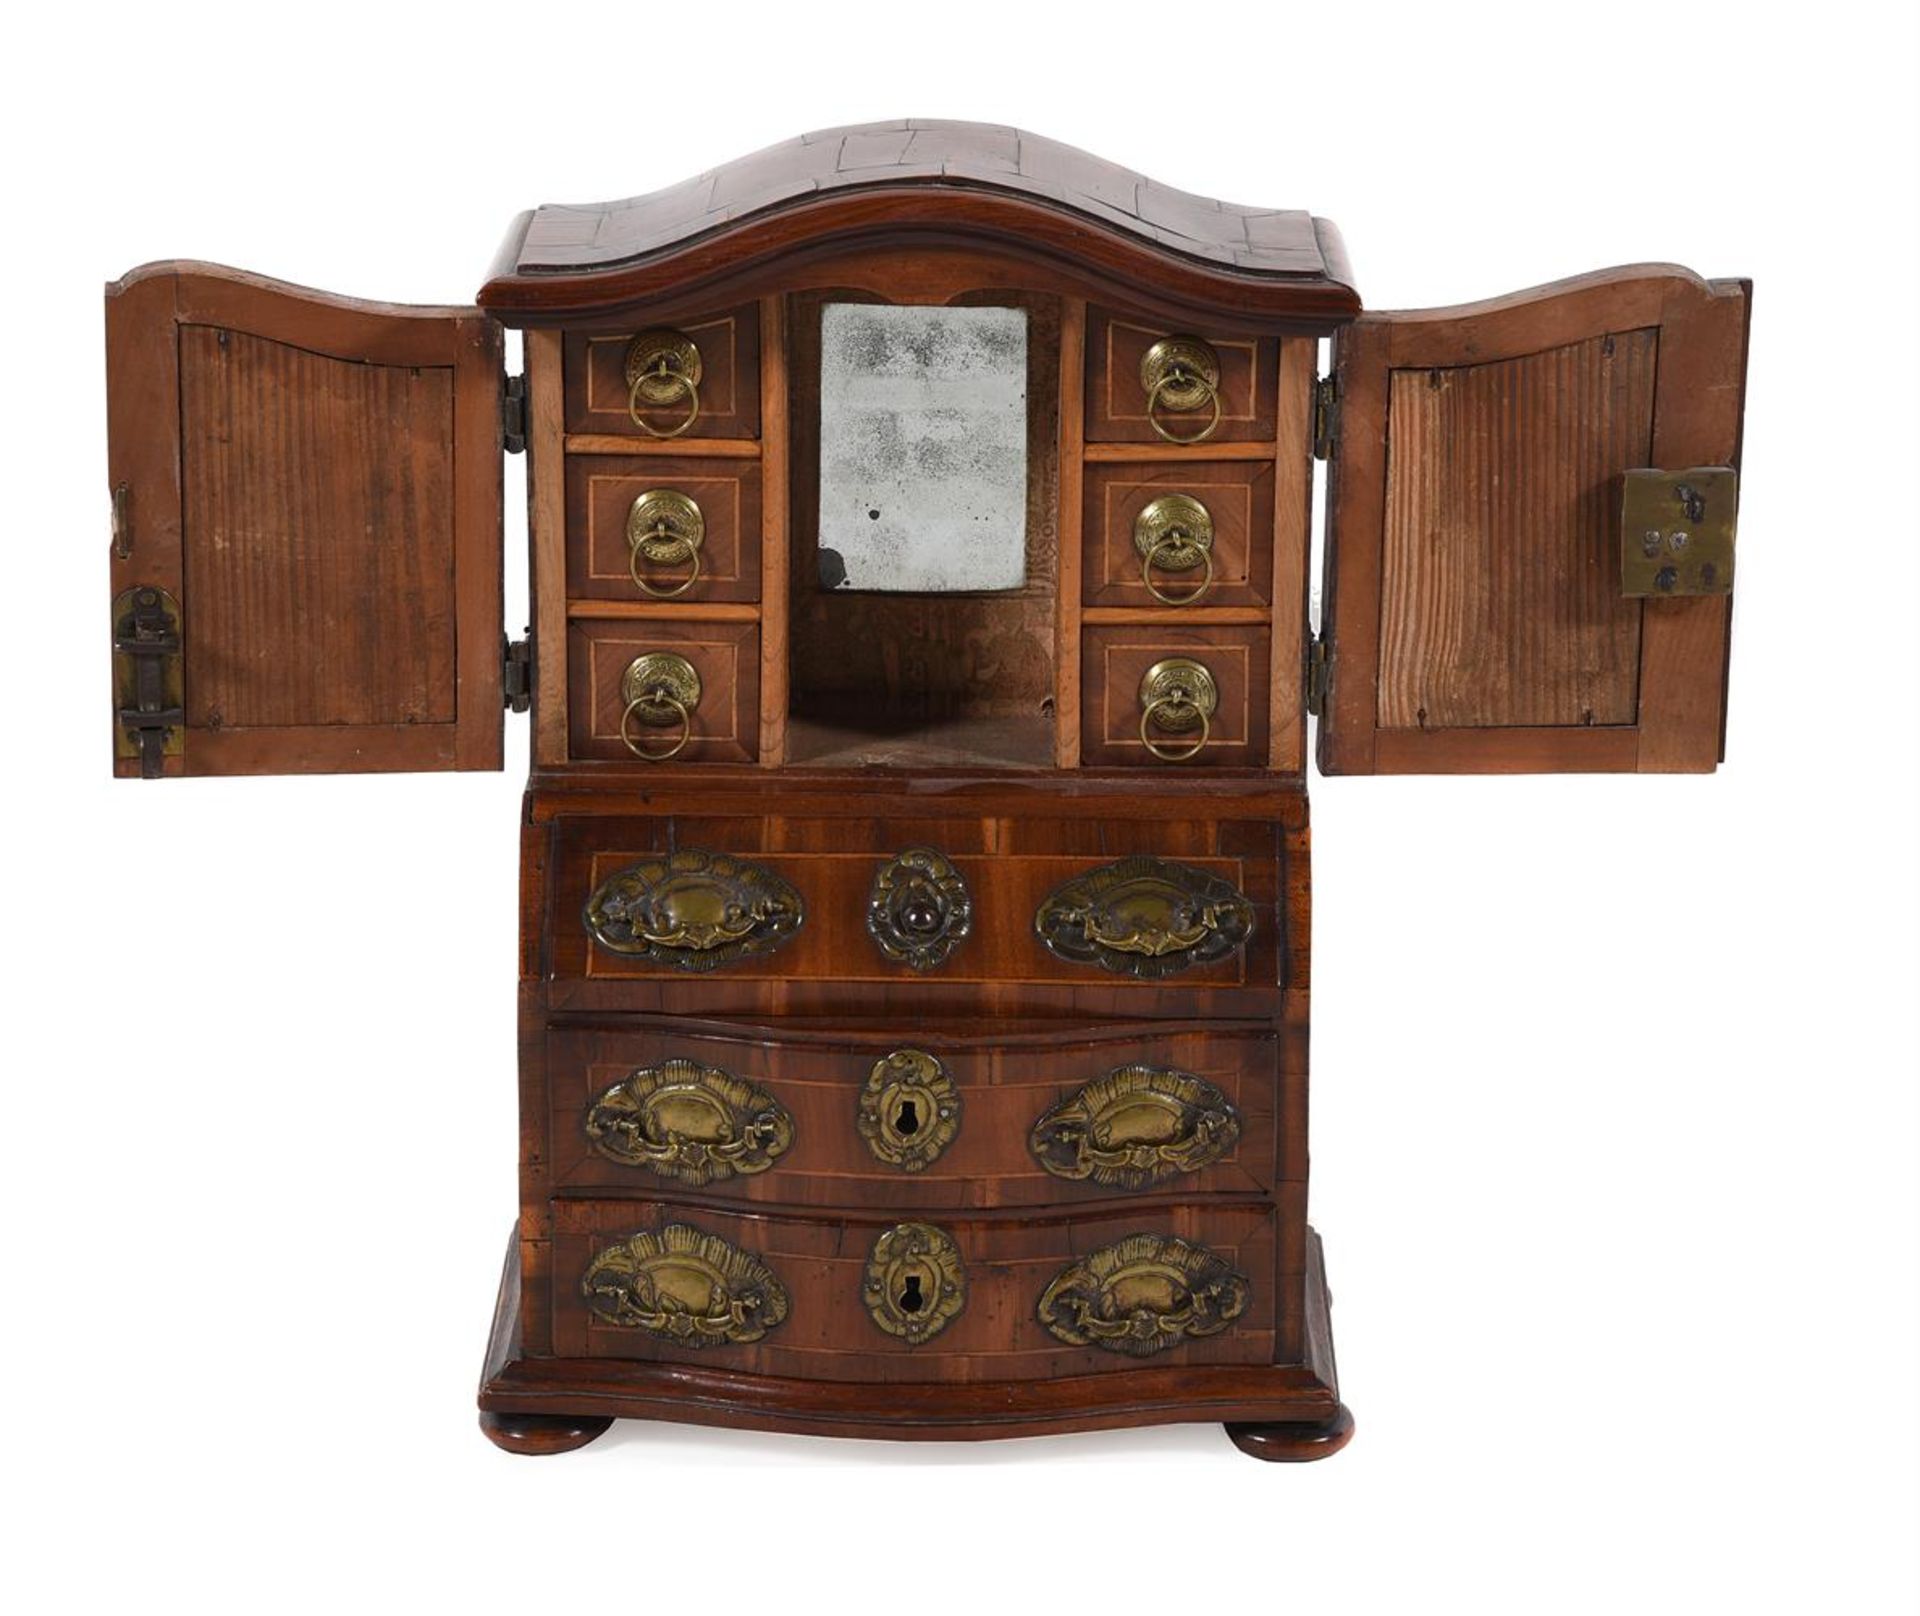 A CONTINENTAL WALNUT AND LINE INLAID MINIATURE OR APPRENTICE BUREAU CABINET, MID 18TH CENTURY - Image 2 of 3